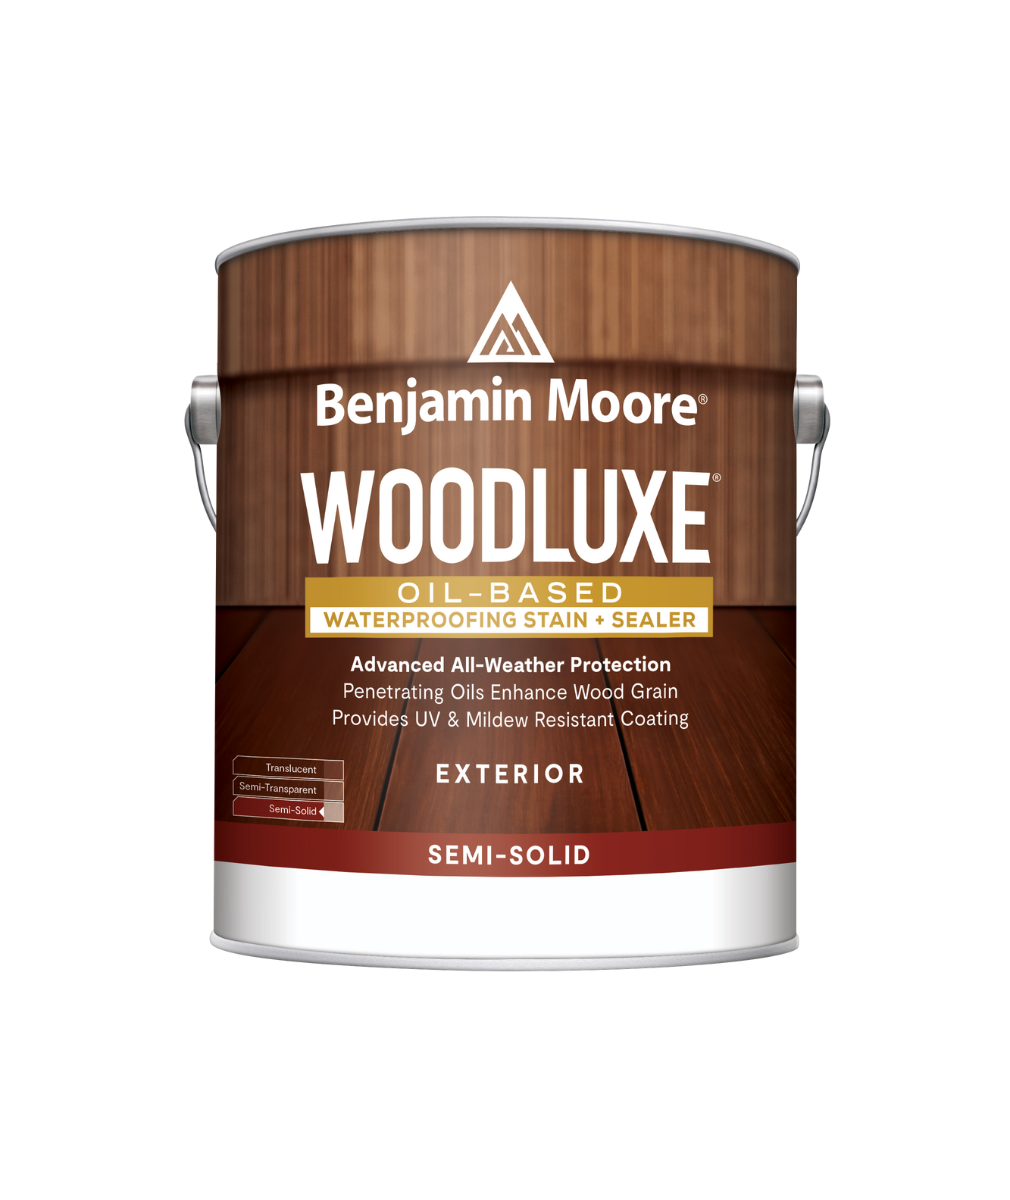 Benjamin Moore Woodluxe® Oil-Based Semi-Solid Exterior Stain available at Clement's Paint in Austin, Texas.